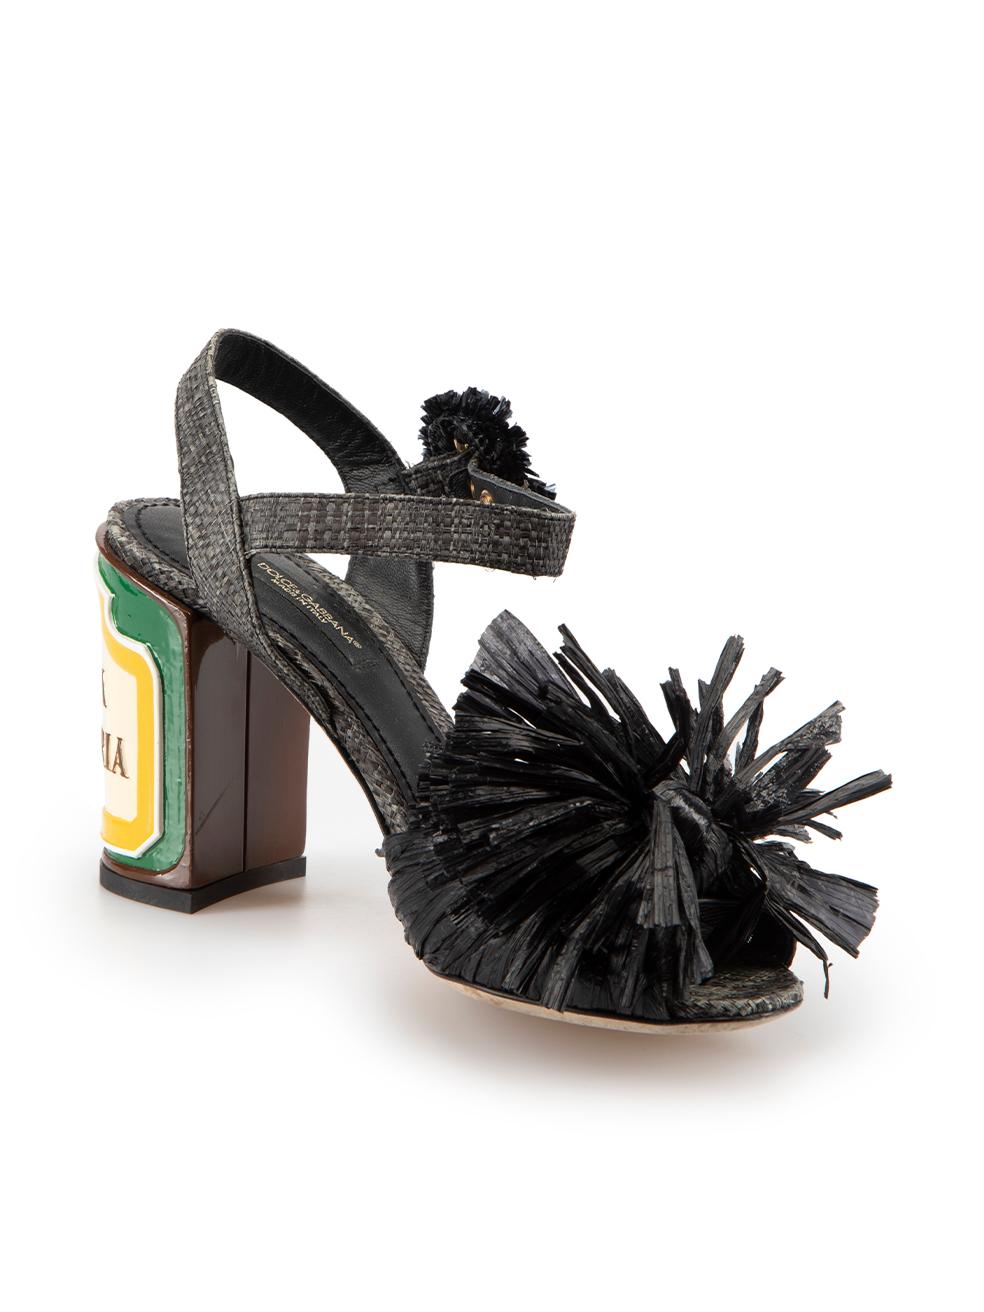 CONDITION is Very good. Minimal wear to sandals is evident. Minimal wear to the left shoe heel with small chip on this used Dolce & Gabbana designer resale item.



Details


Black

Straw

Heeled sandals

Raffia detail

High block heel

Multicolour